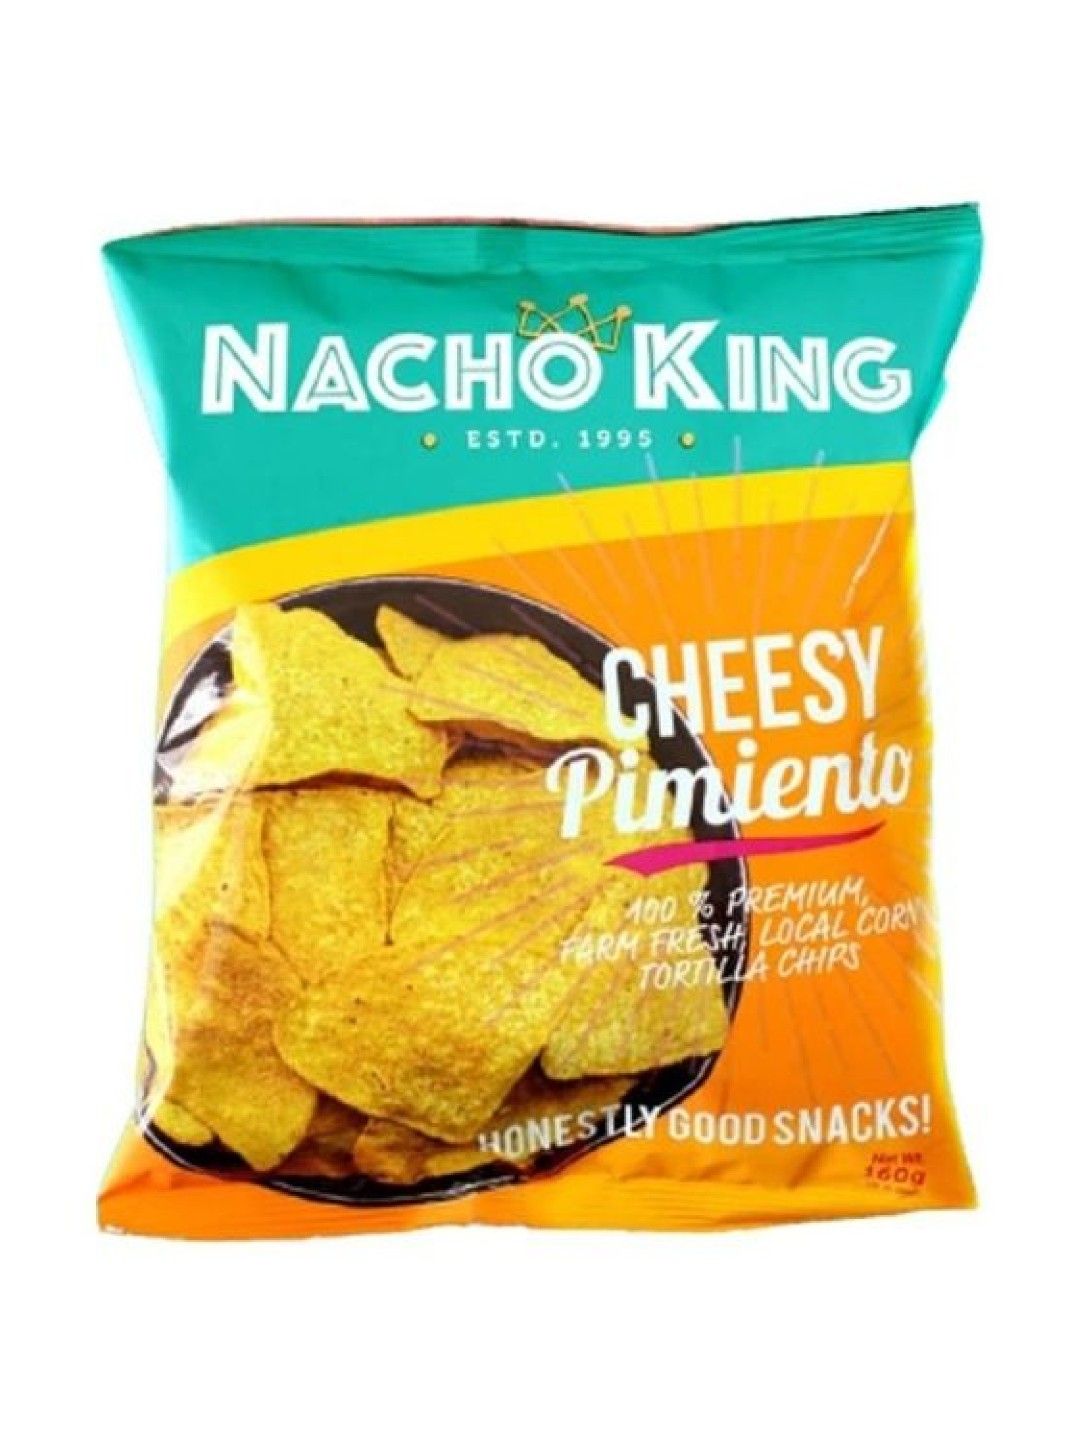 Nacho King Flavored Tortilla Chips - Cheesy Pimiento (160g)